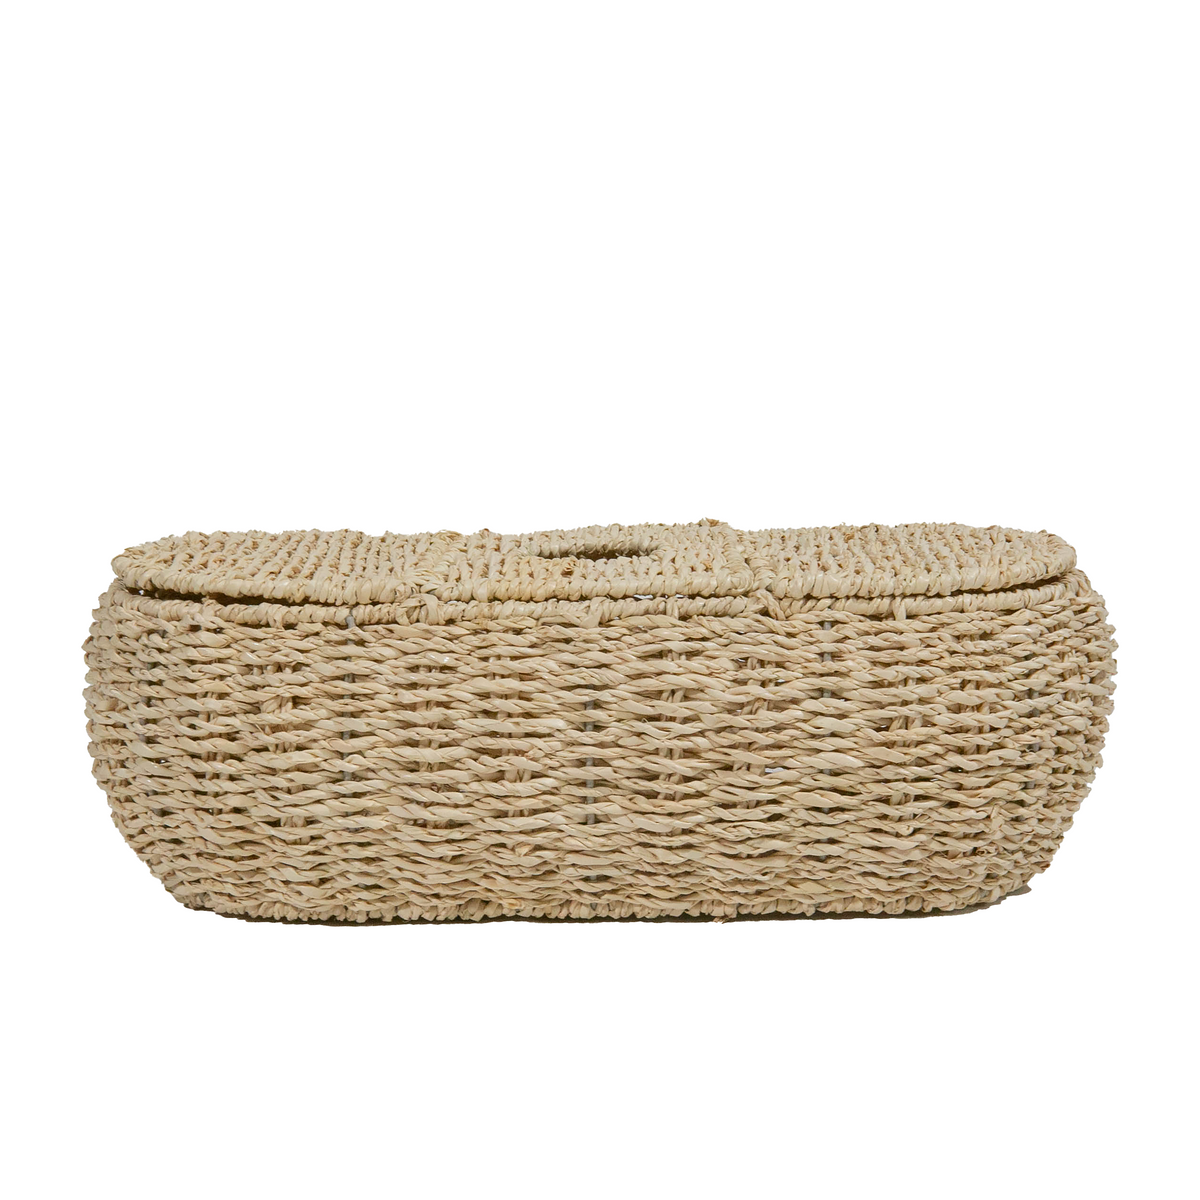 3 Part Tissue Basket in Twisted Seagrass